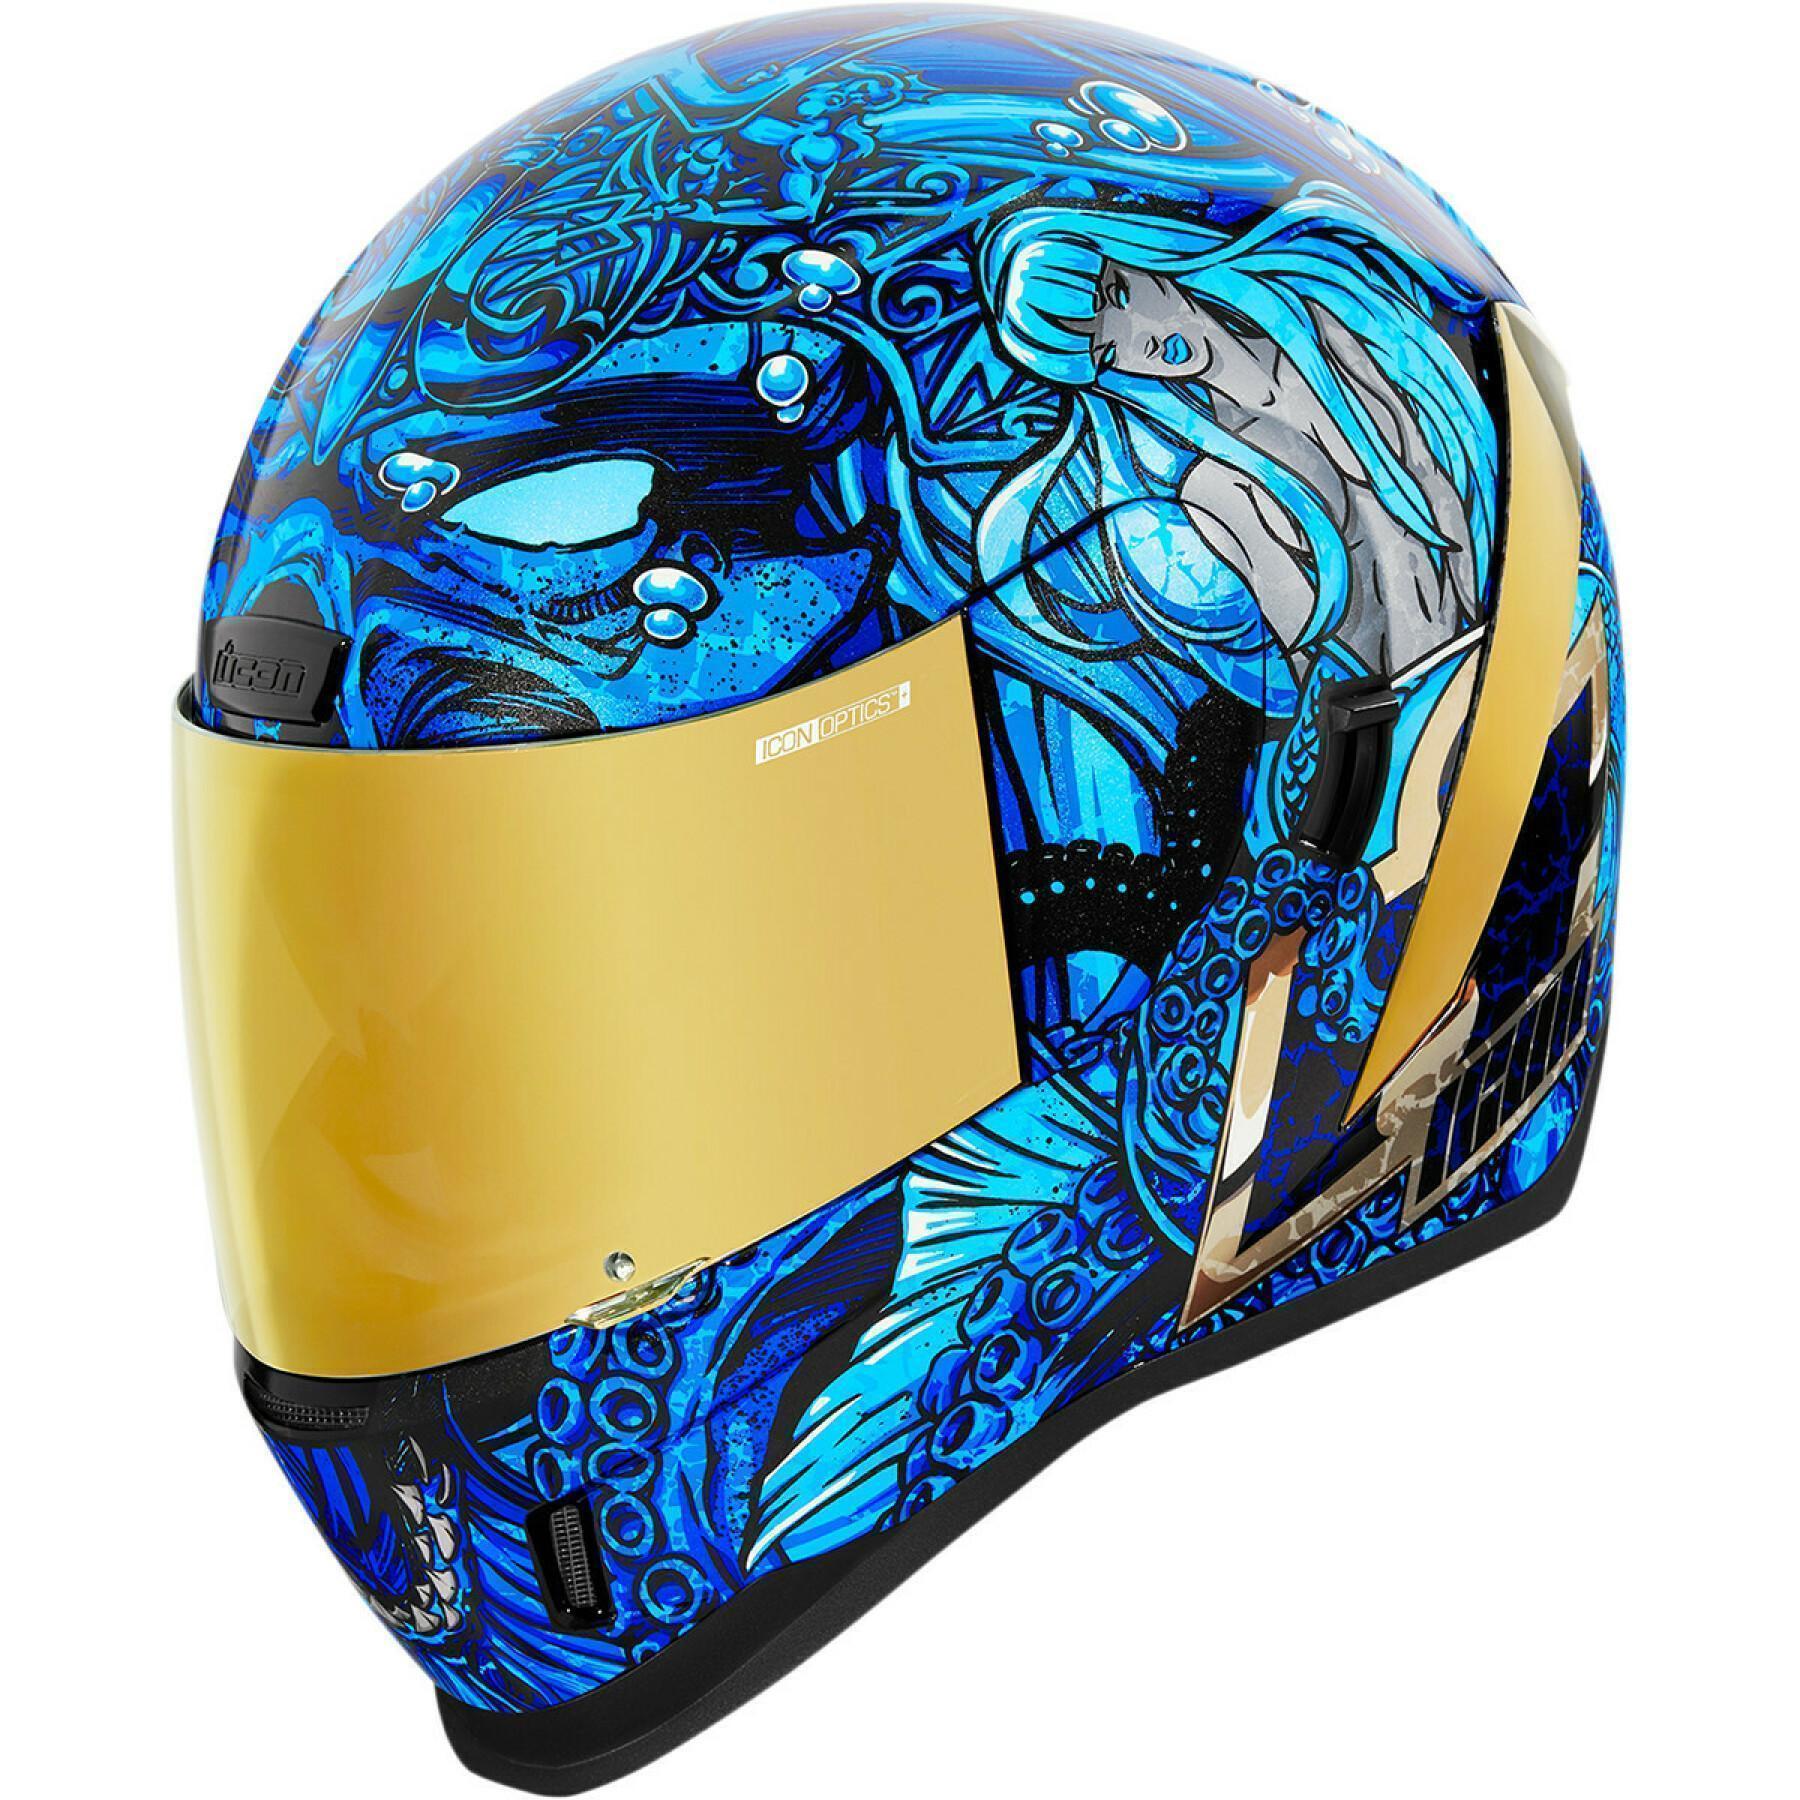 Full face motorcycle helmet Icon afrm ships co.